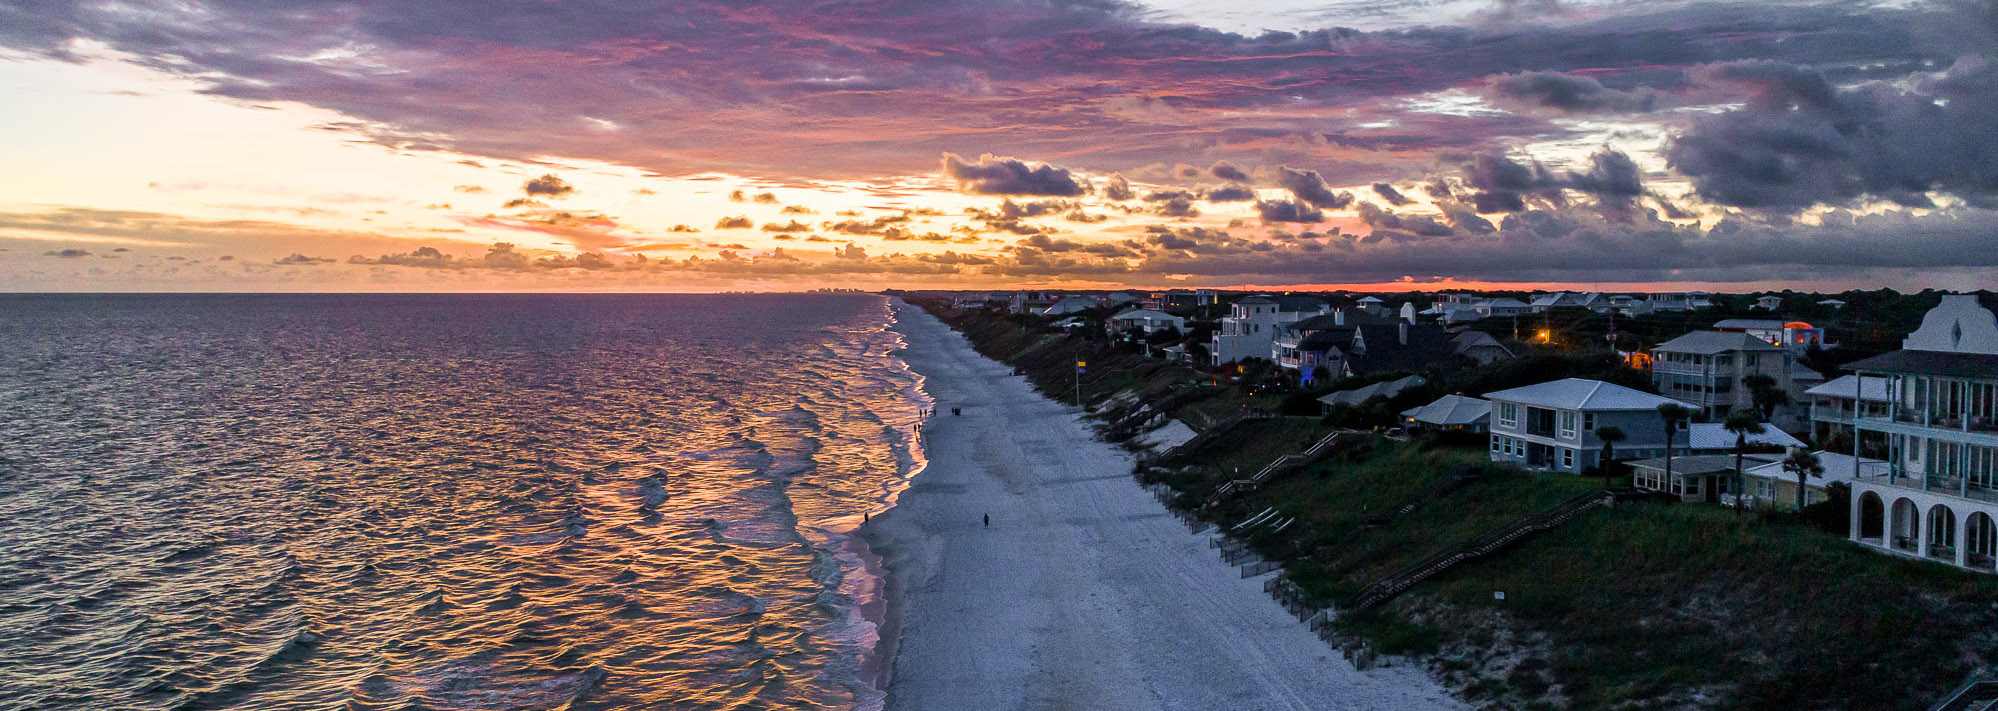 Sunset over Seagrove Beach with people having a bonfire on the sand at the shoreline.